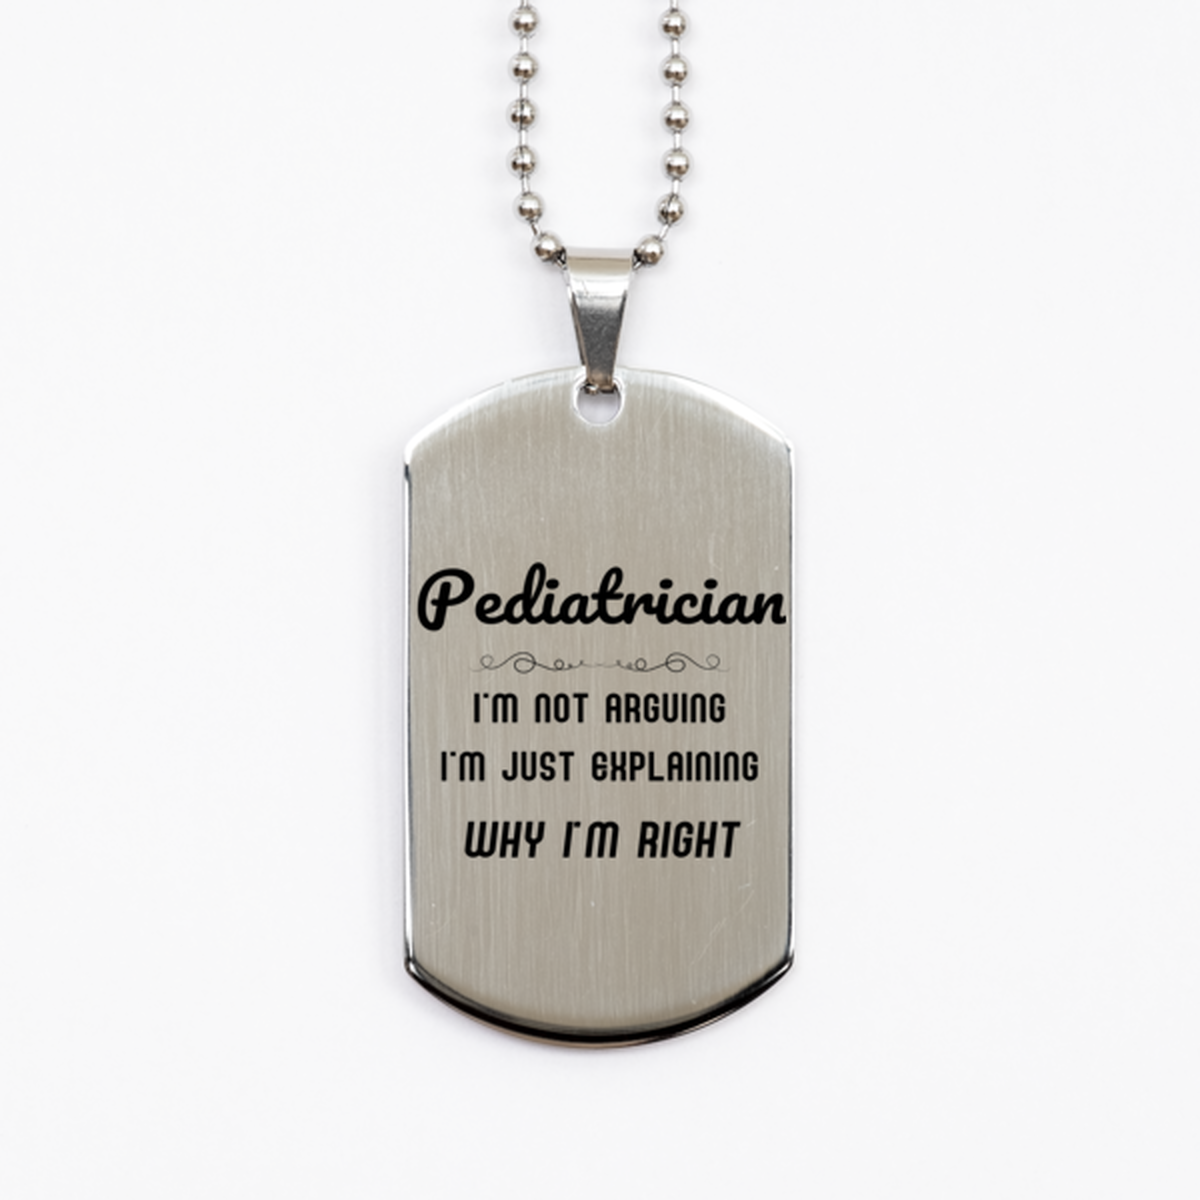 Pediatrician I'm not Arguing. I'm Just Explaining Why I'm RIGHT Silver Dog Tag, Funny Saying Quote Pediatrician Gifts For Pediatrician Graduation Birthday Christmas Gifts for Men Women Coworker